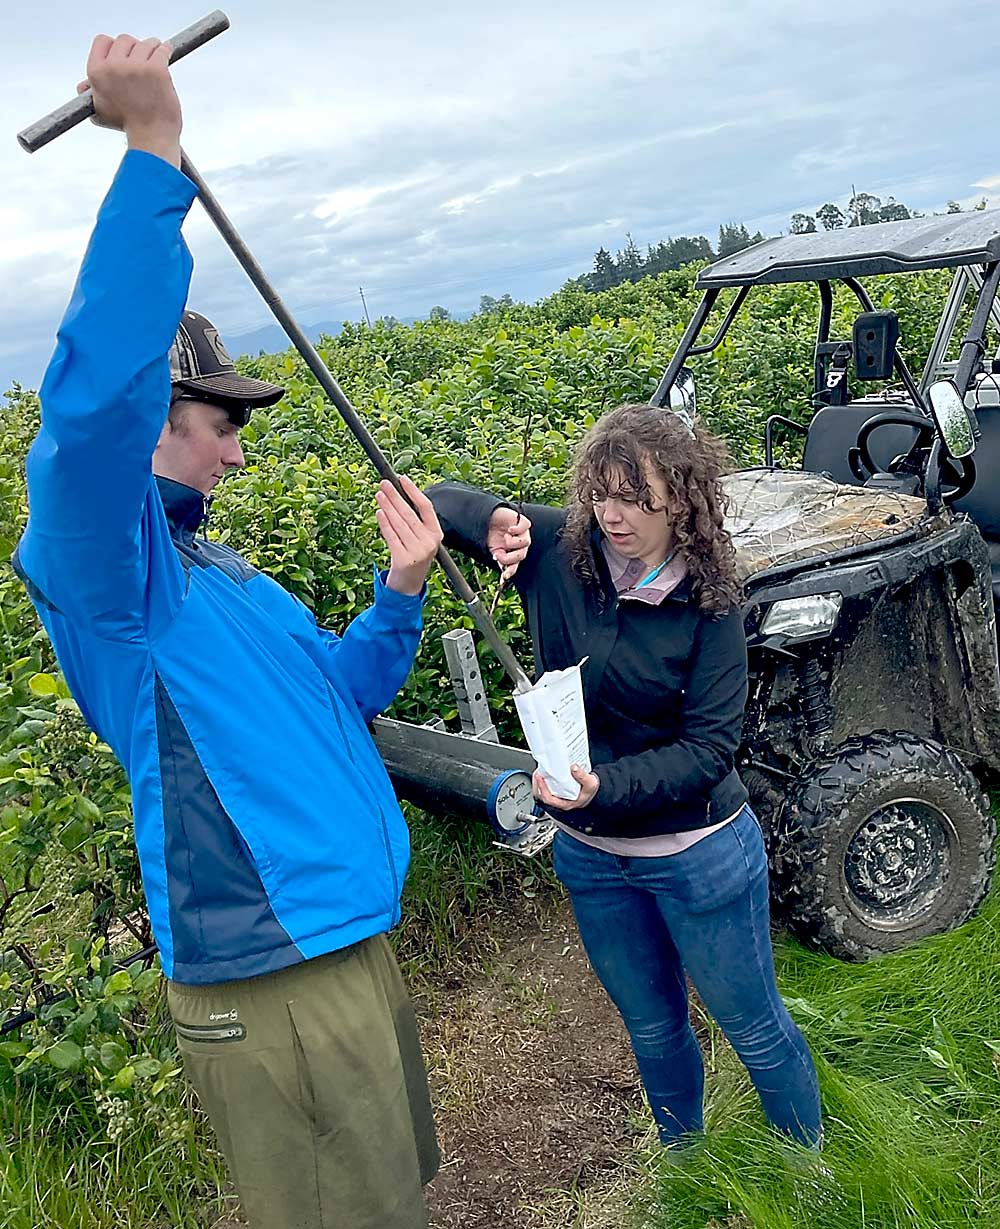 Buddy Moench, left, an innov8.ag intern from Whitman College, collects a soil sample with Western Washington University student Cosette Ensminger in a Skagit Valley blueberry field. (Courtesy Steve Mantle/innov8.ag)